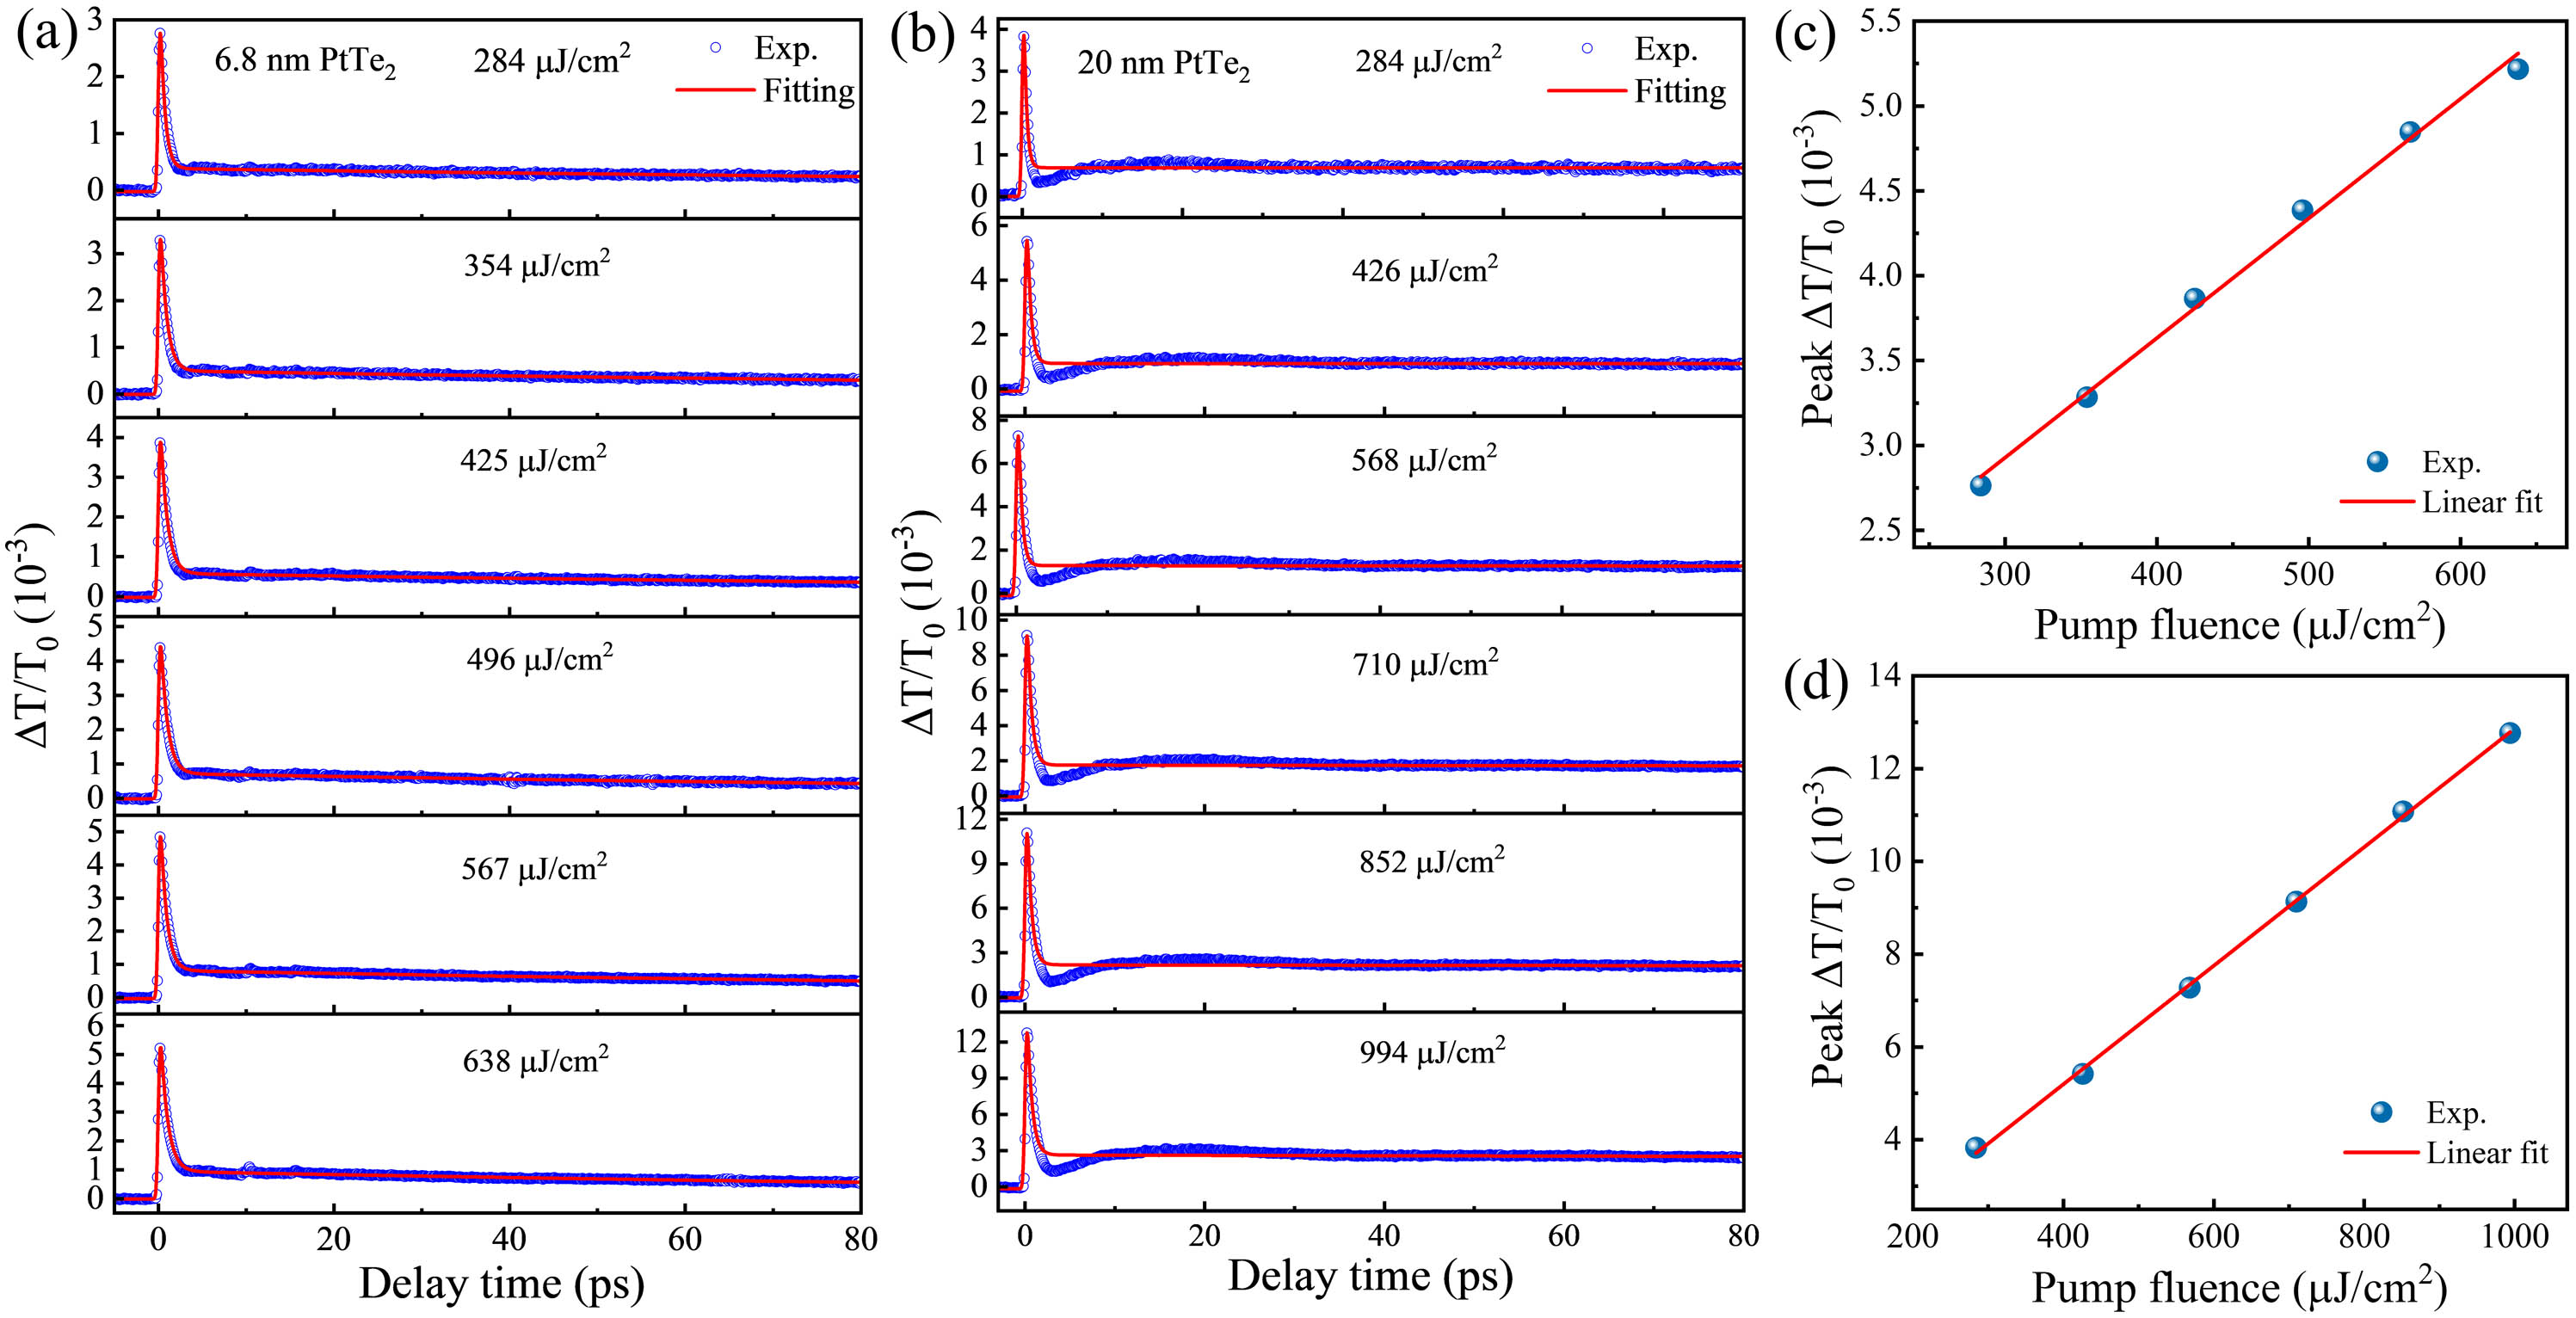 Time-resolved transient transmission trace ΔT/T0 of (a) 6.8 nm and (b) 20 nm PtTe2 films under various pump fluences with pumping and probing at 780 nm. Blue circles denote experimental data; red solid lines are the fitting curves with convoluted biexponential decay function. The peak ΔT/T0 versus pump fluence for (c) 6.8 nm and (d) 20 nm PtTe2 films; red solid lines are the linear fitting.